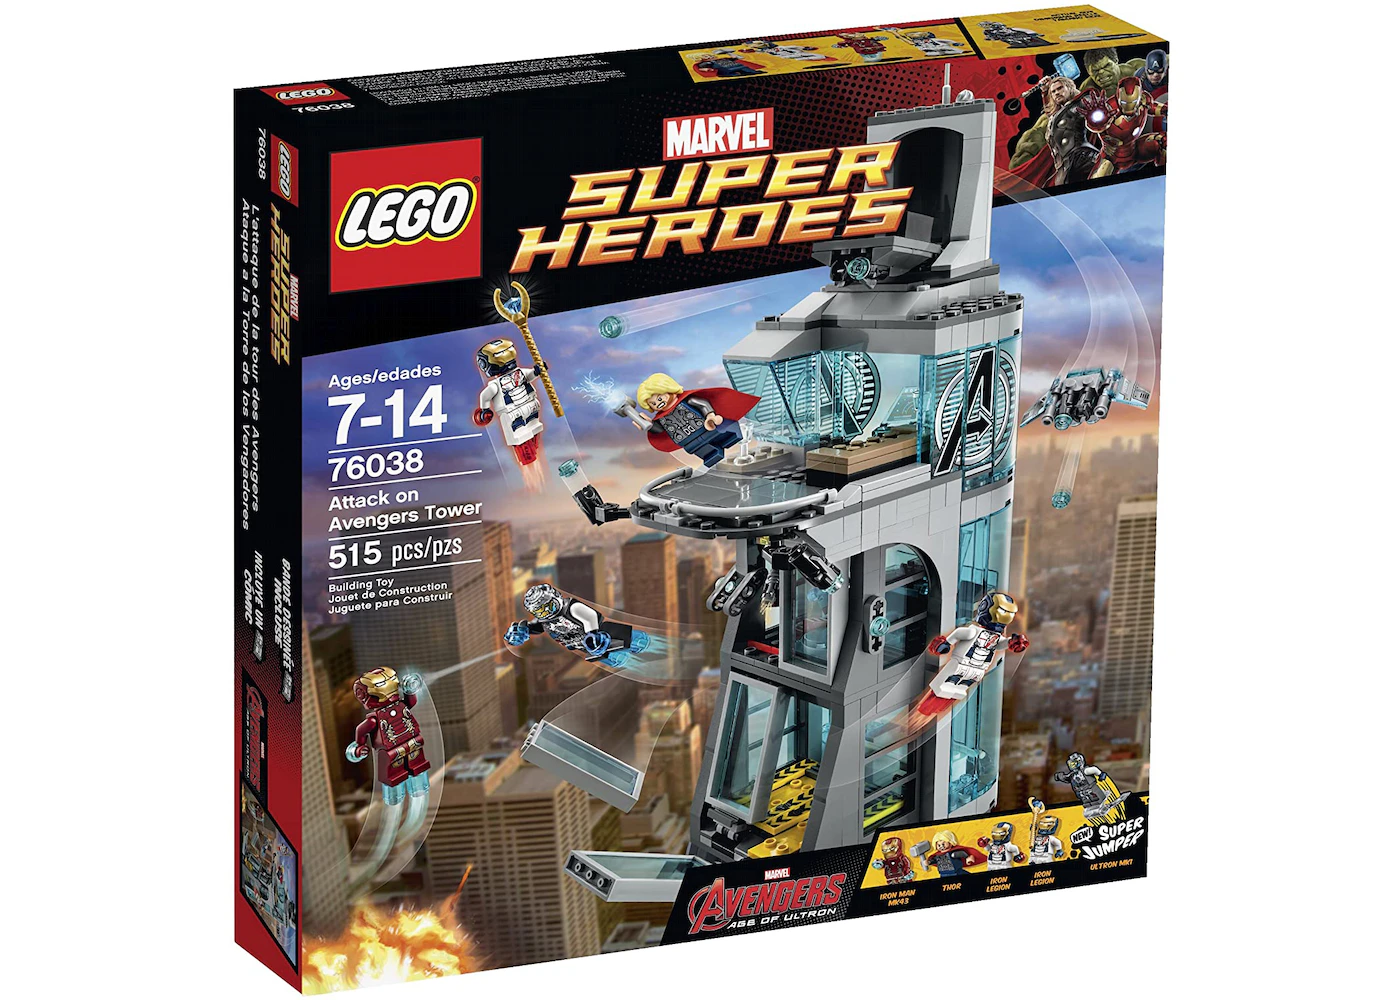 LEGO Marvel Super Heroes Attack on Avengers Tower Set 76038 - US